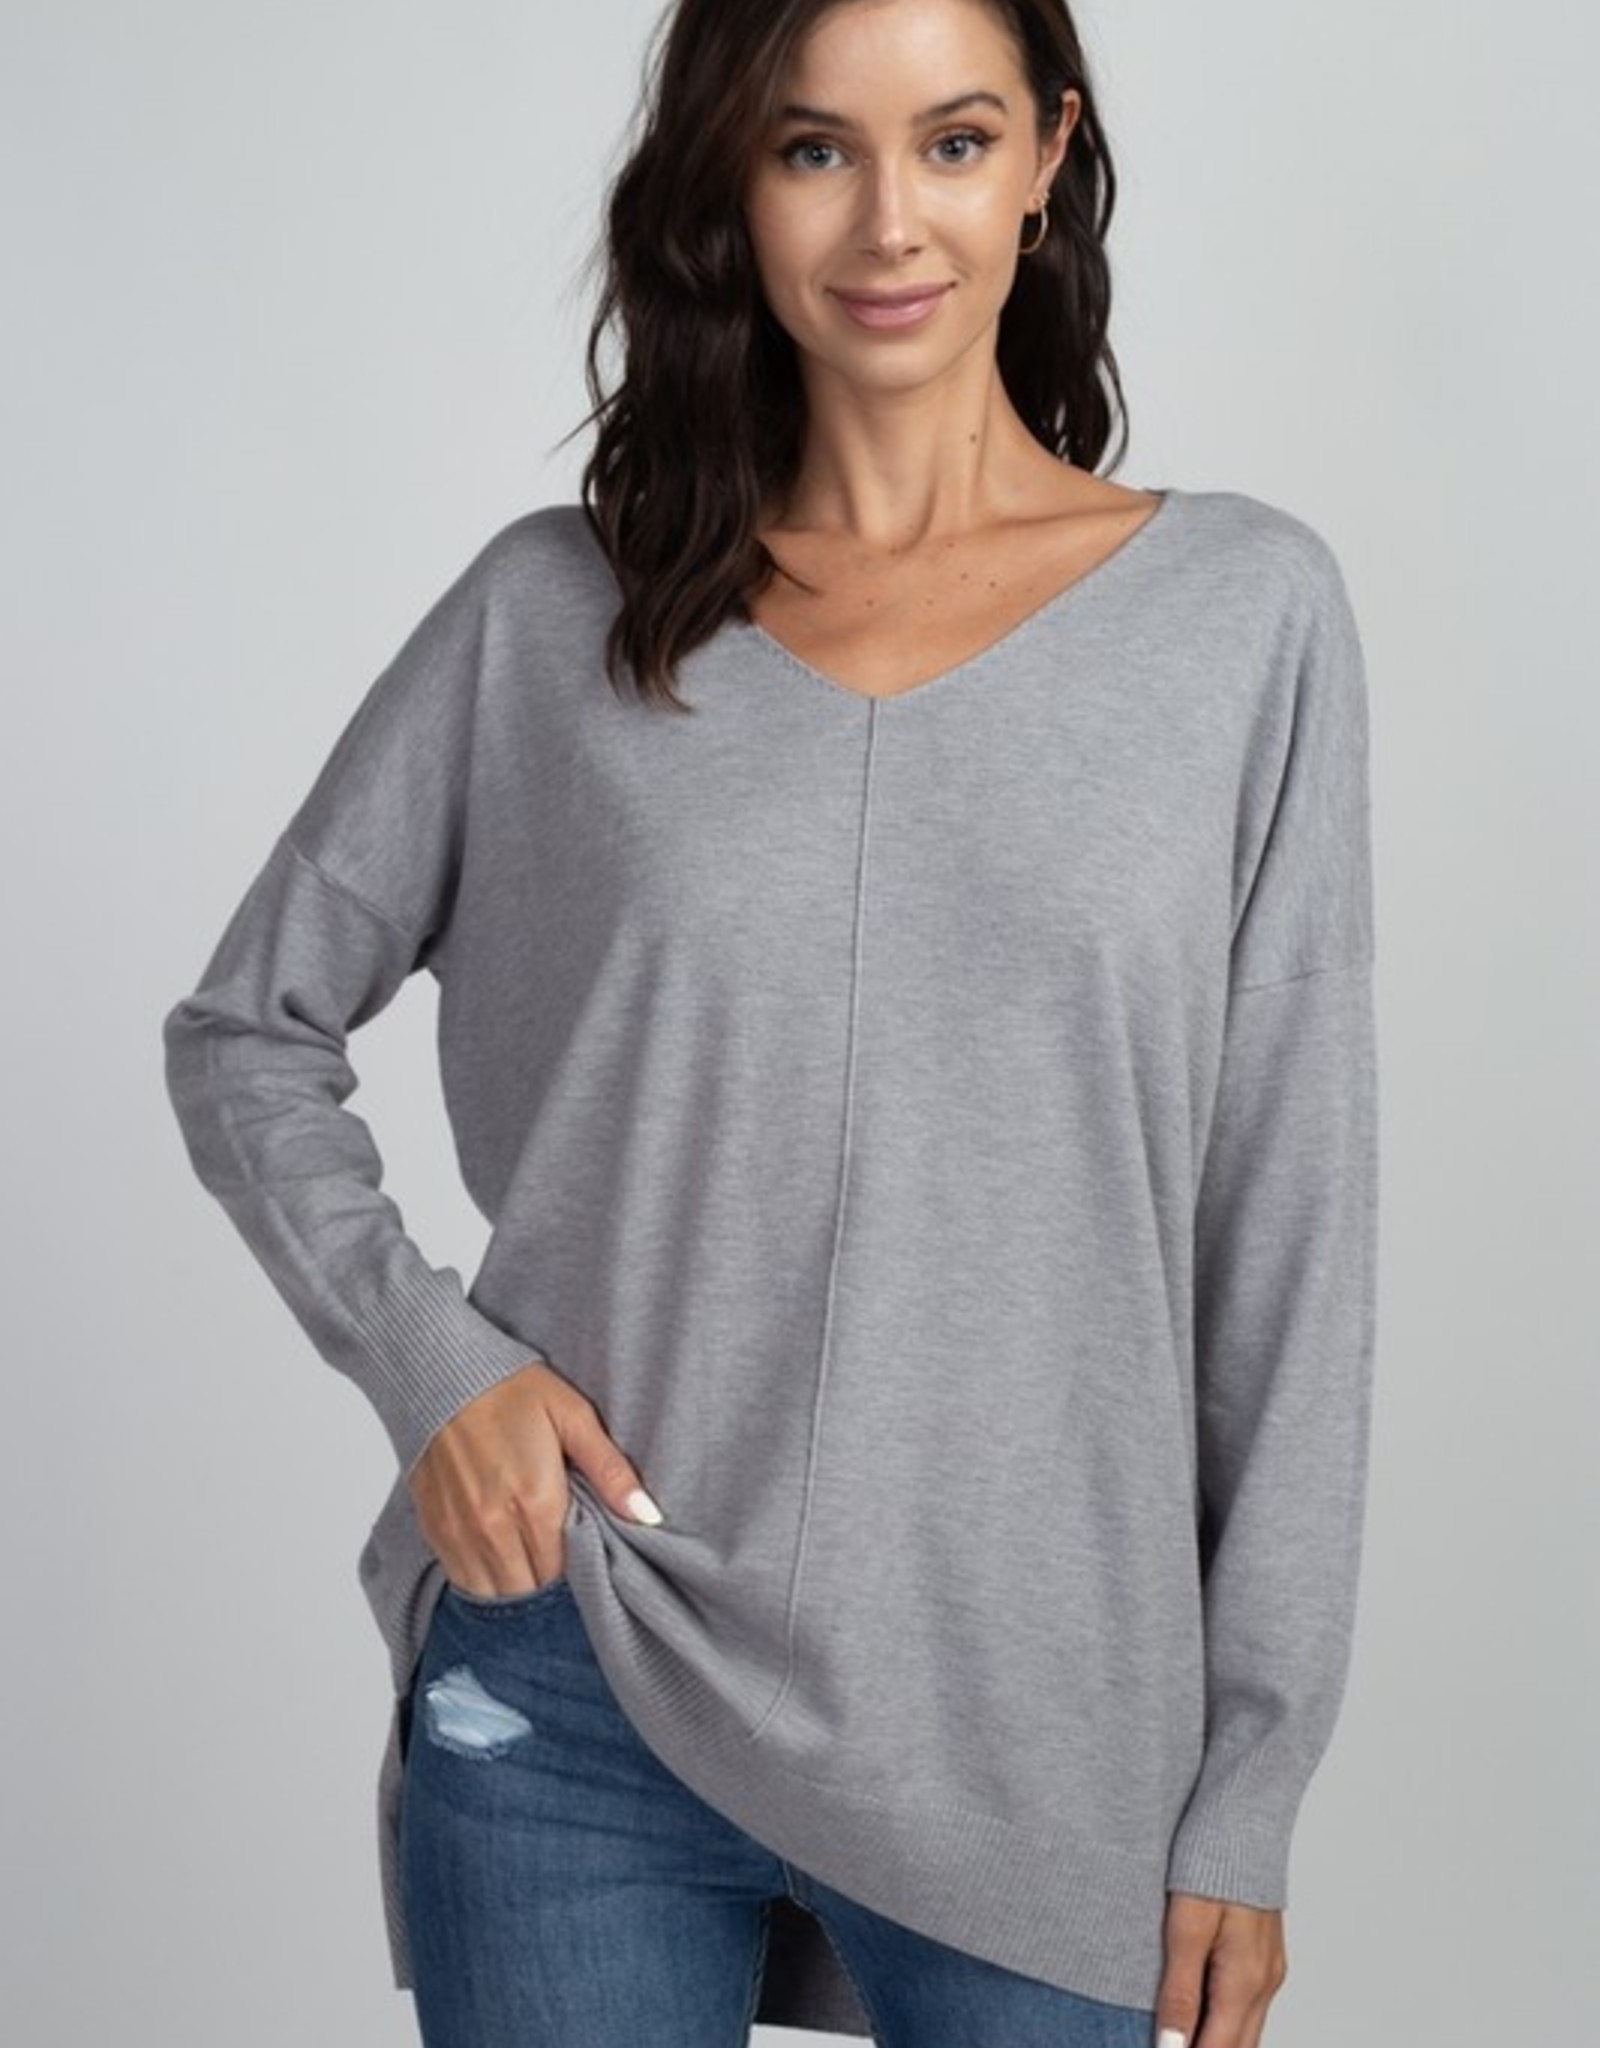 Dreamers by Debut Super Soft V Neck Sweater